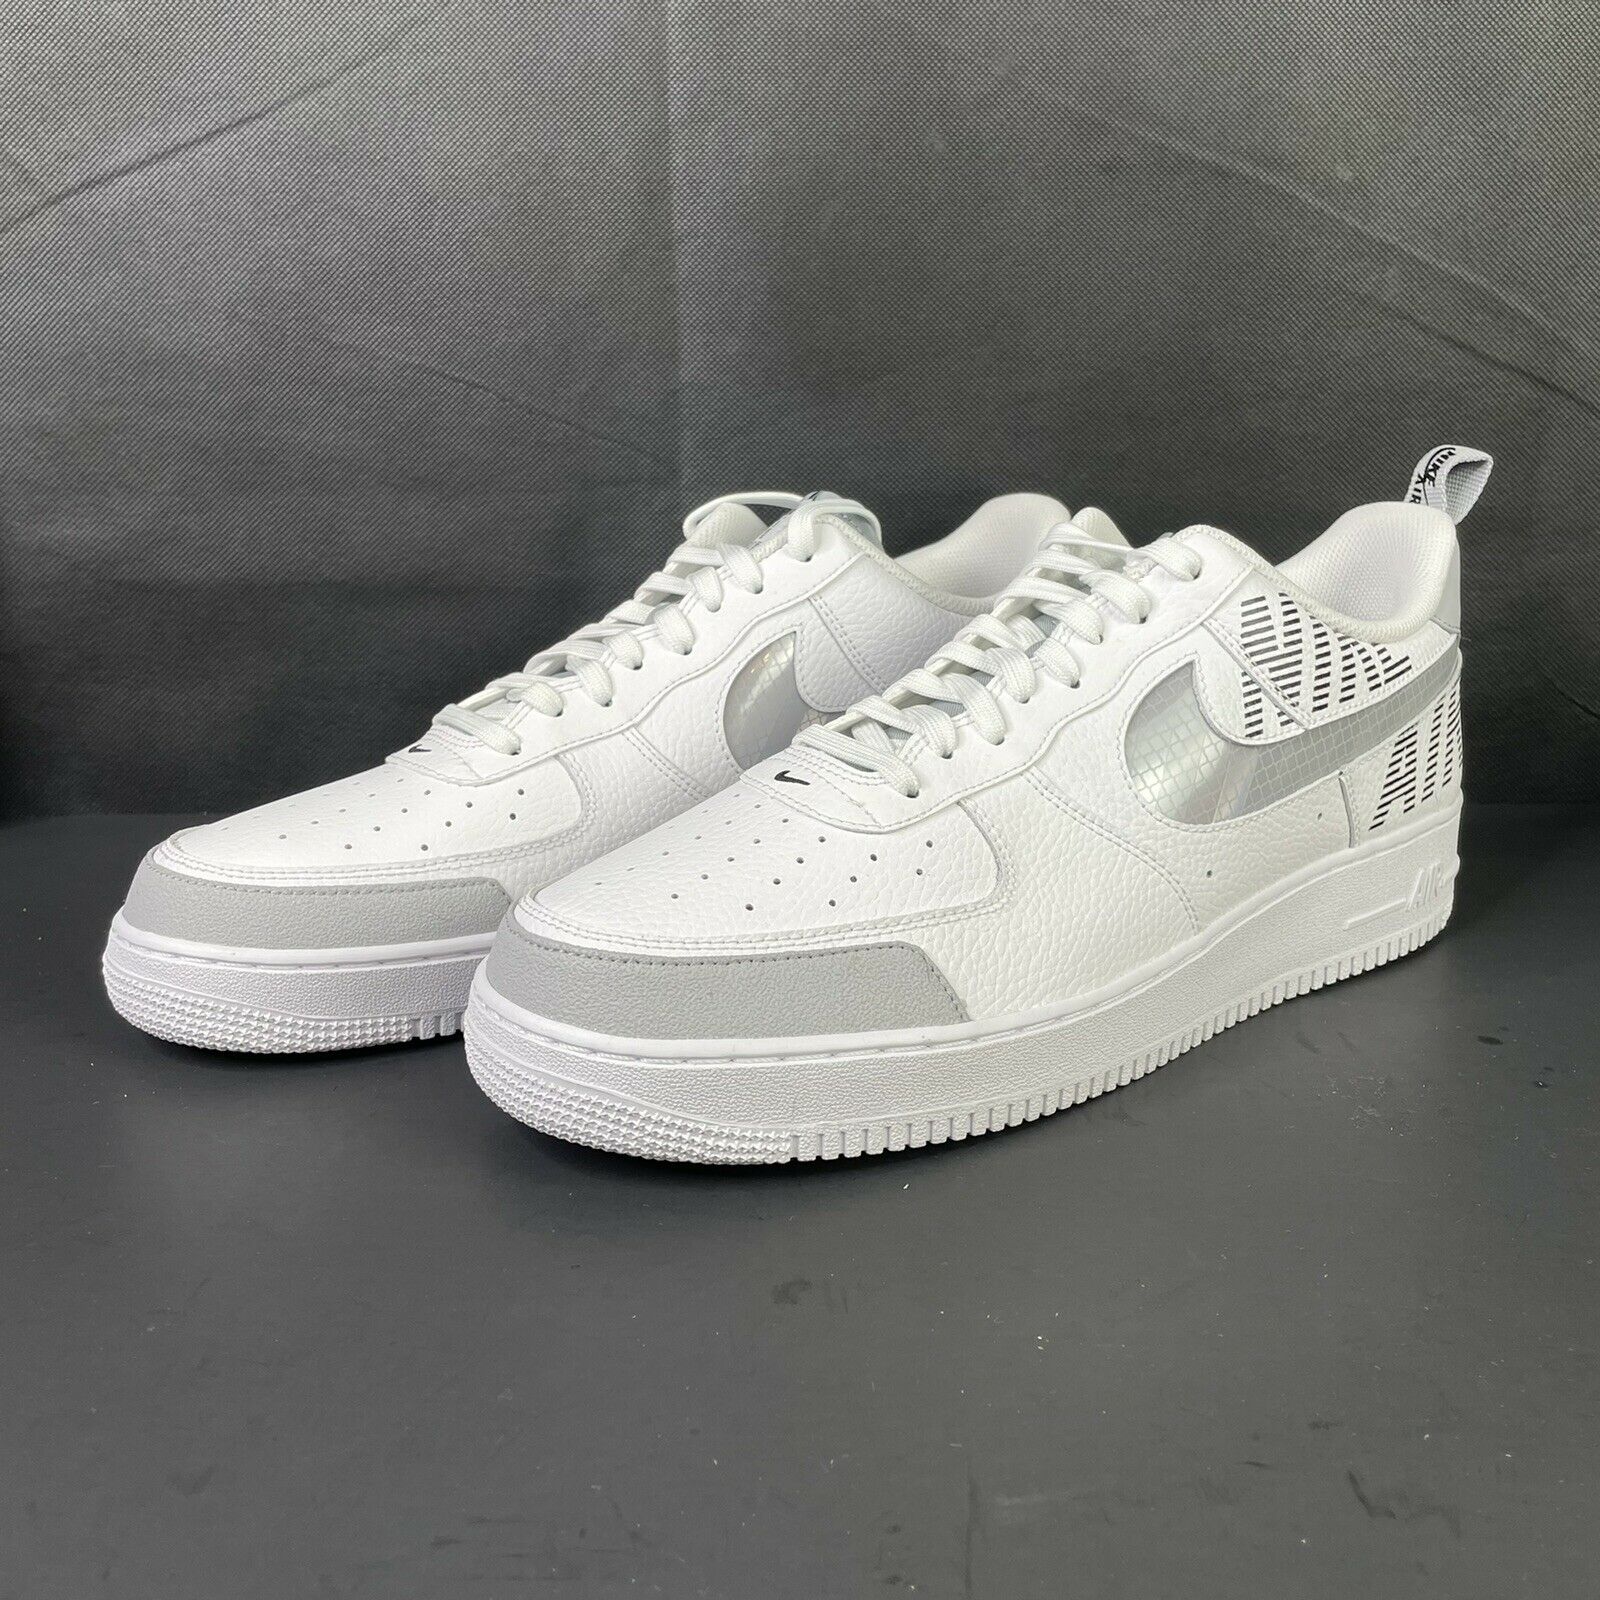 Nike Air Force 1 '07 LV8 2 Under Construction White Grey BQ4421 100 Size 14